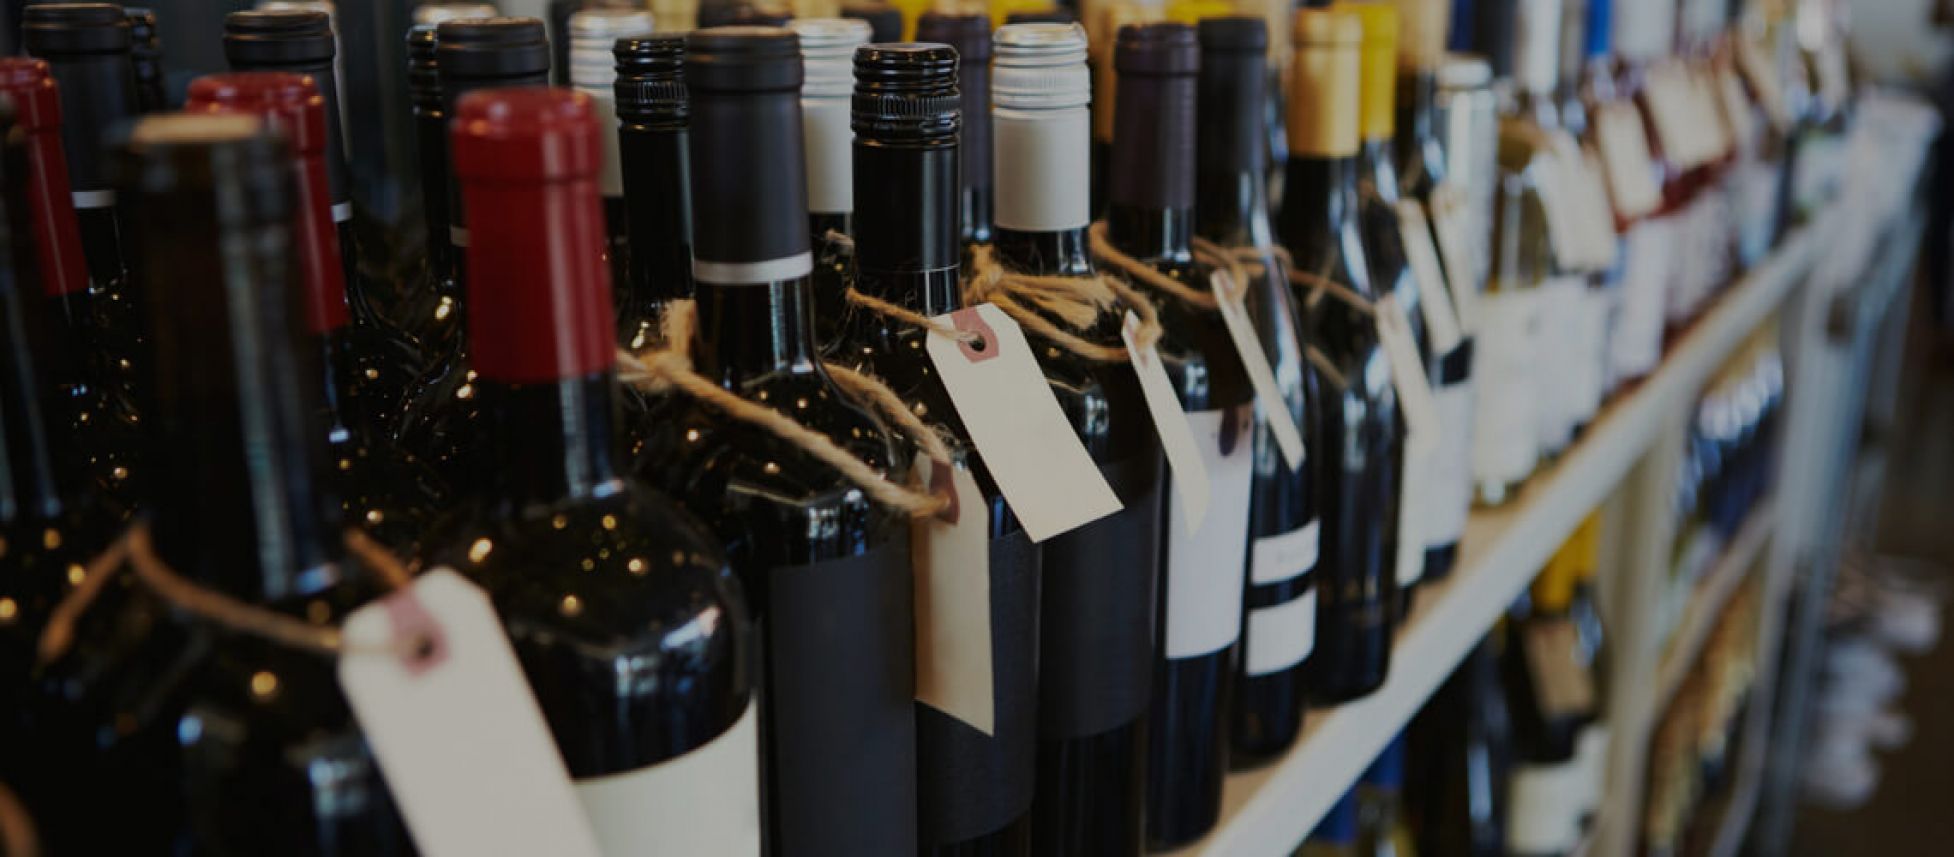 Photo for: 10 Leading Private Label Wine Brands From the Nation’s Top Retailers